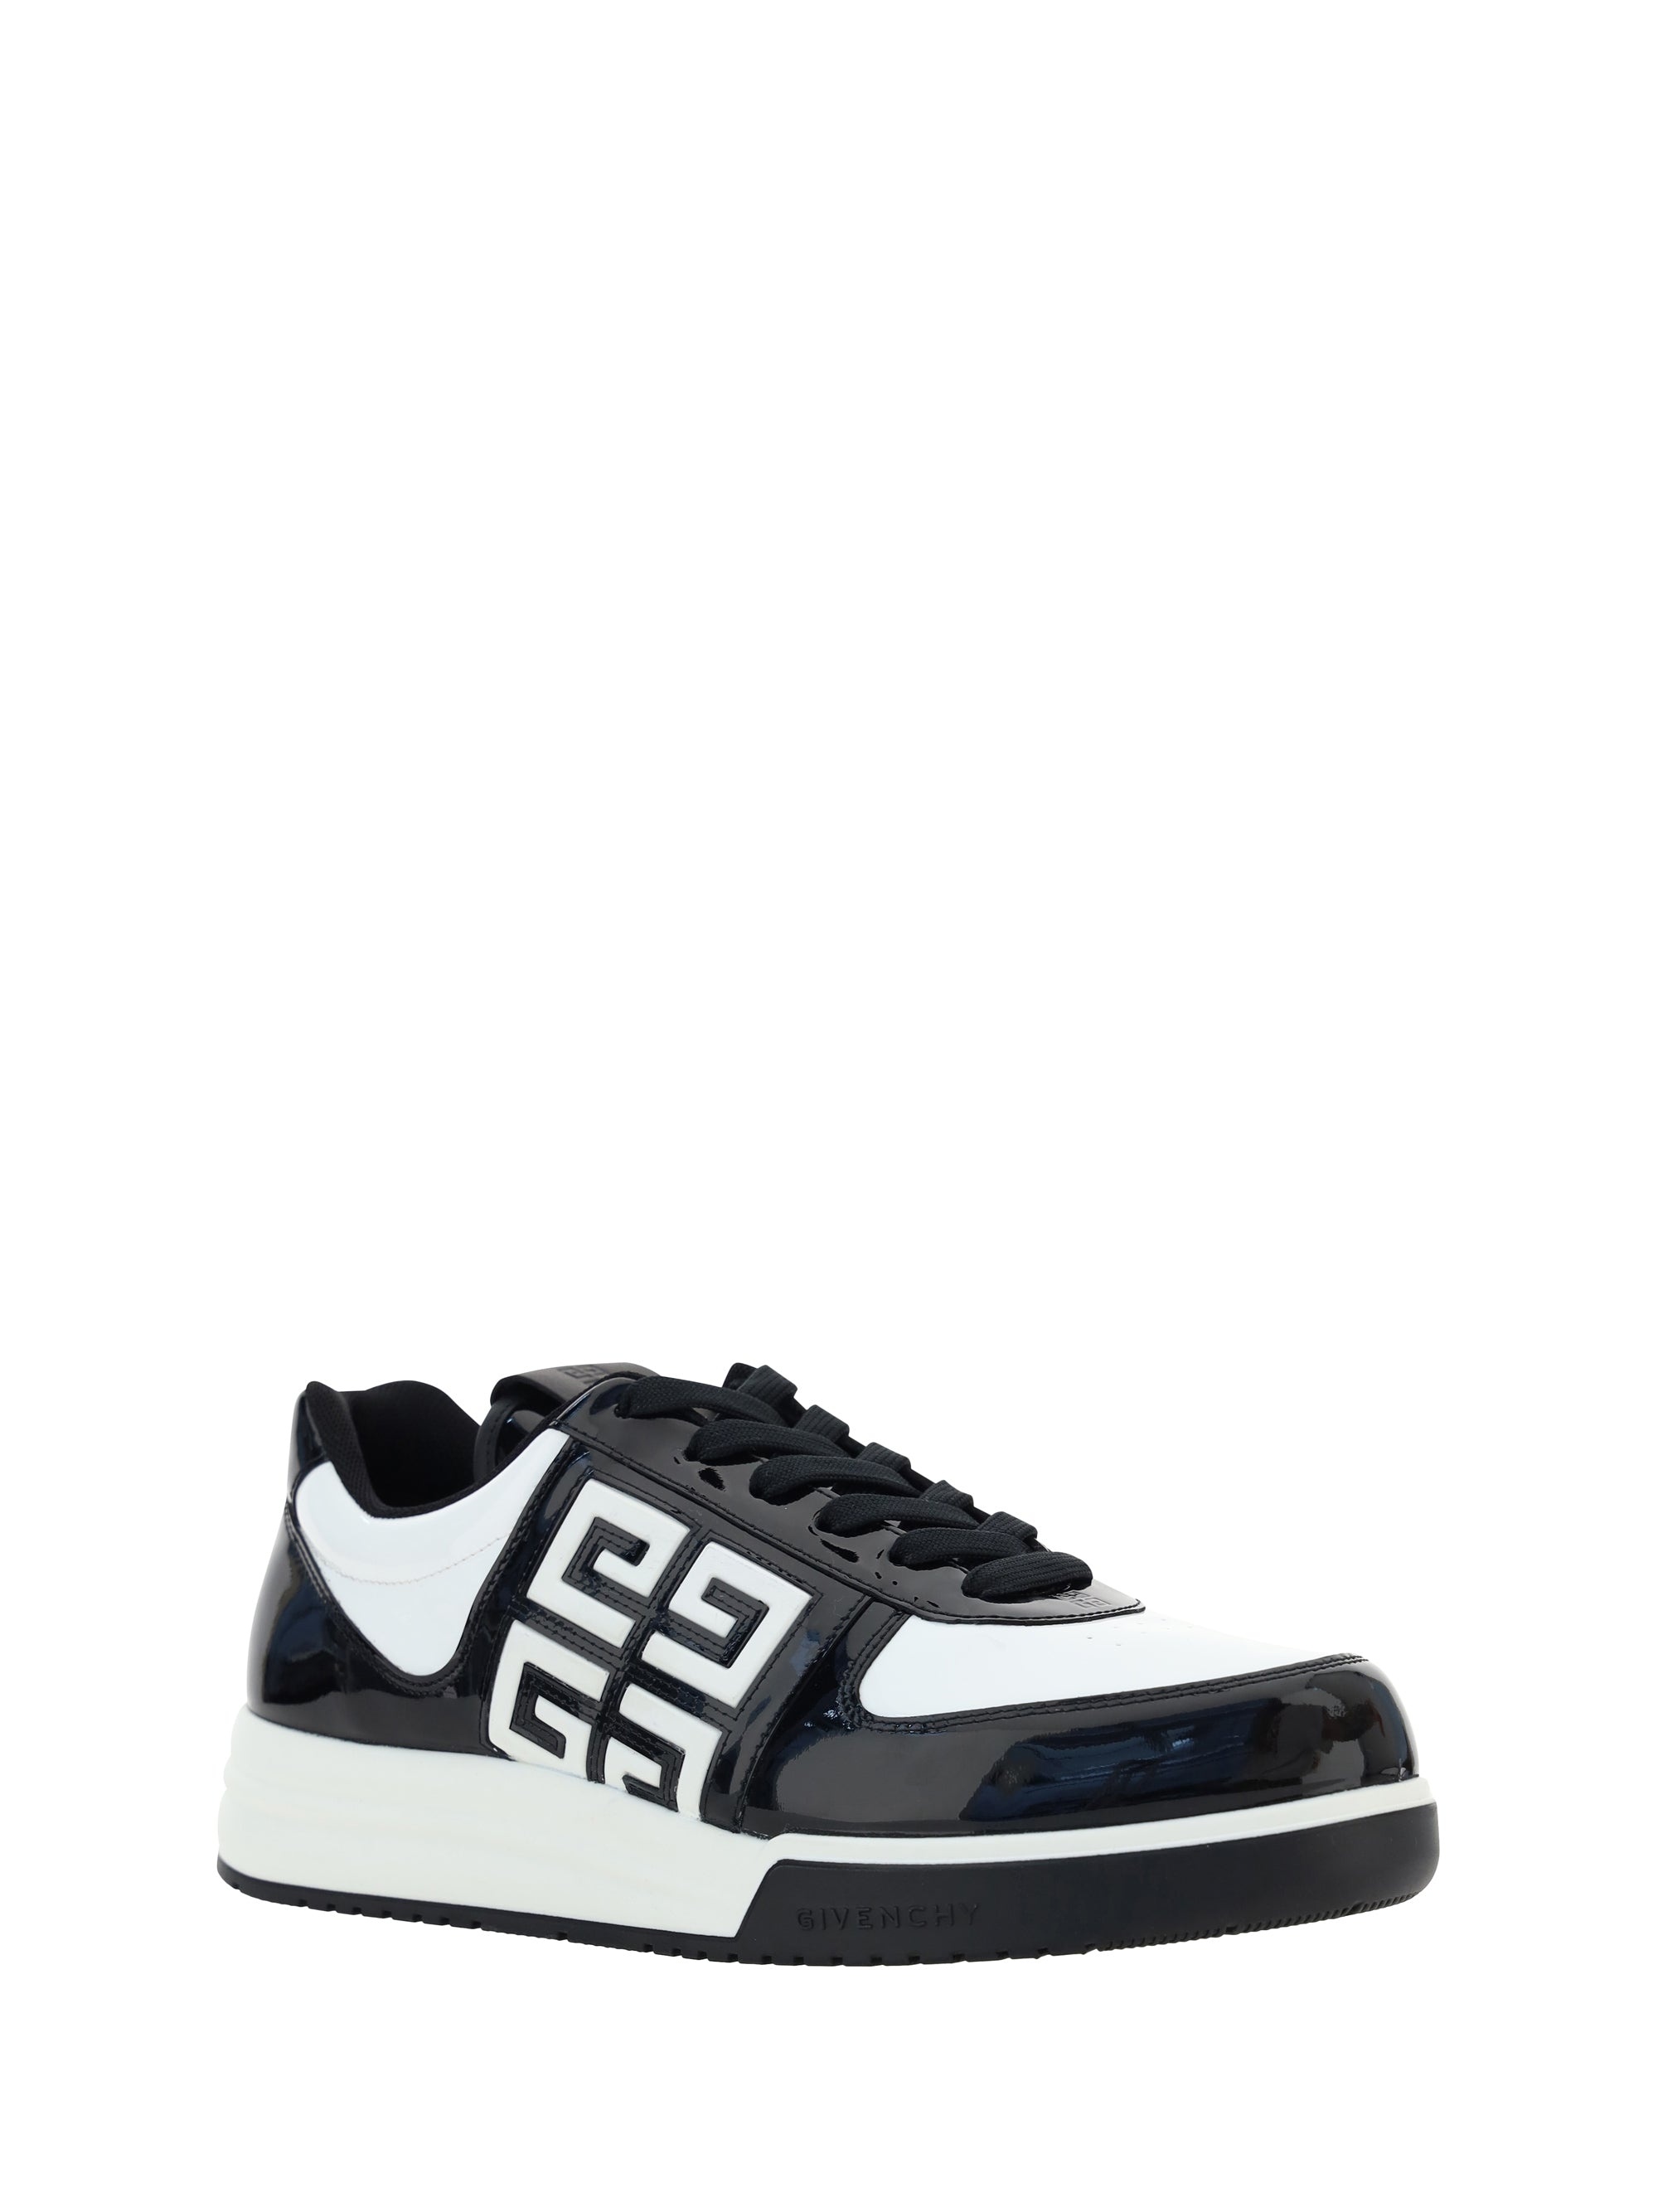 Givenchy Men G4 Low Top Sneakers - 2